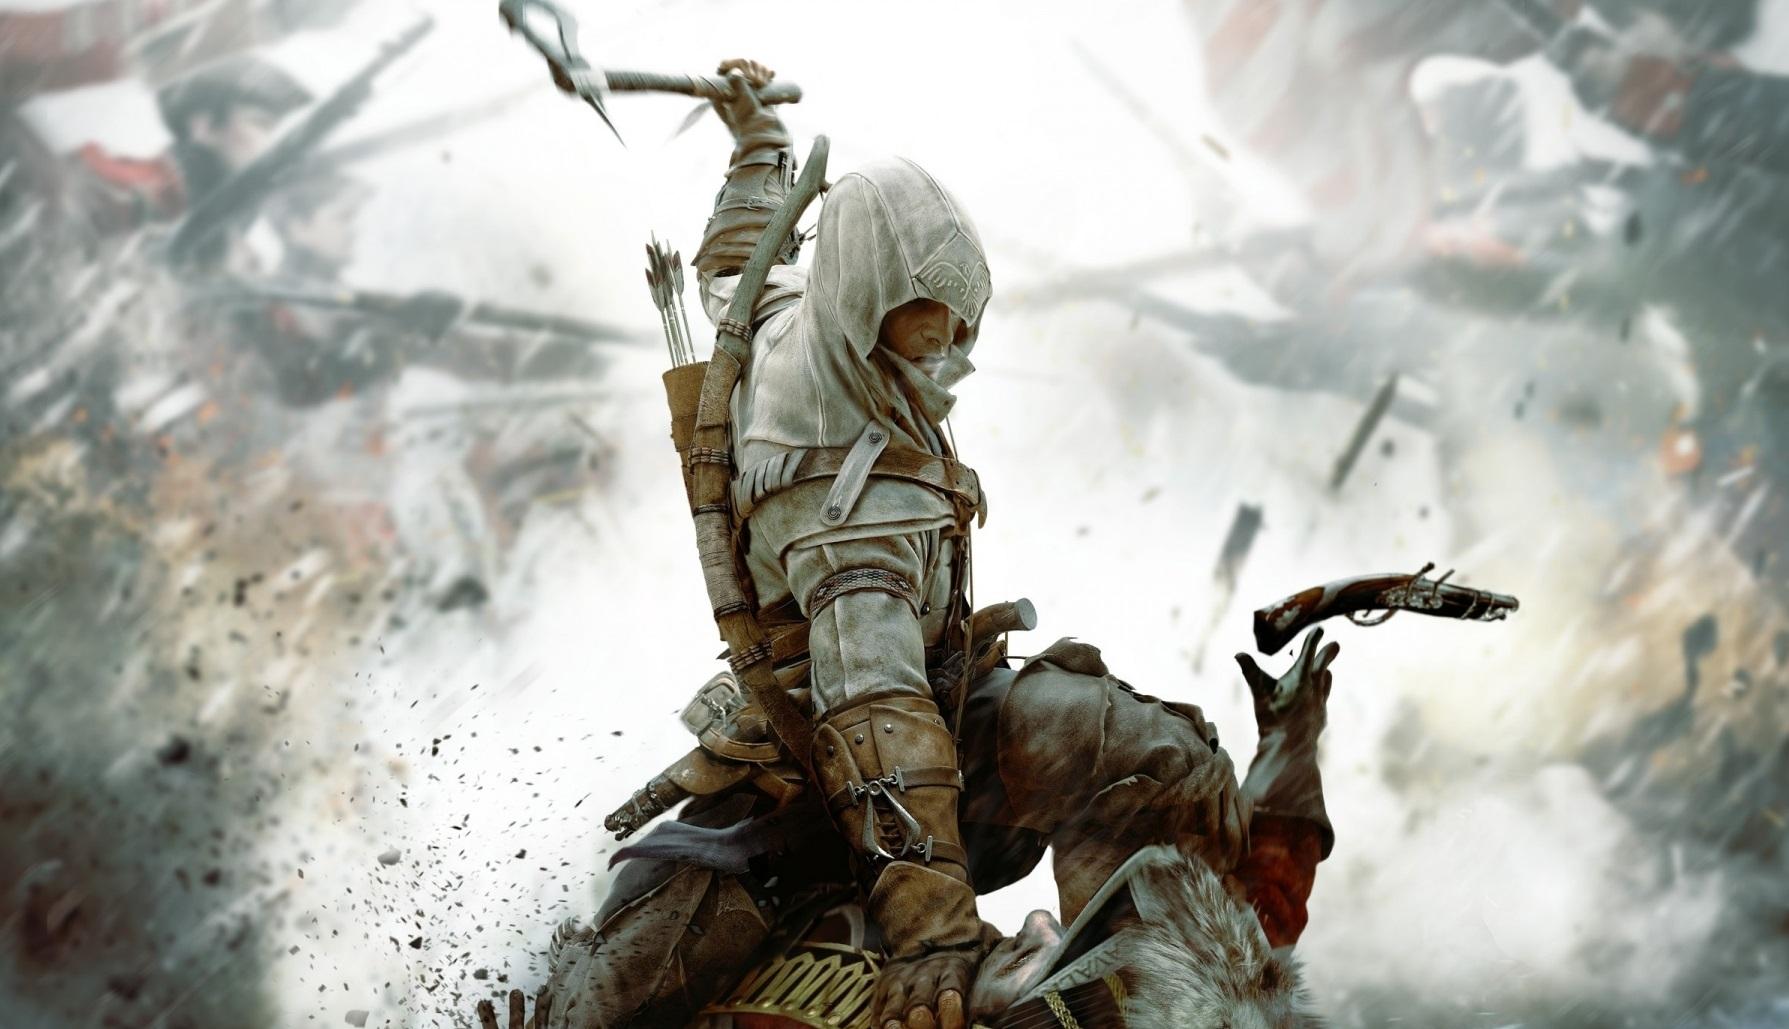 Assassin's Creed 3 Remastered features improved gameplay mechanics